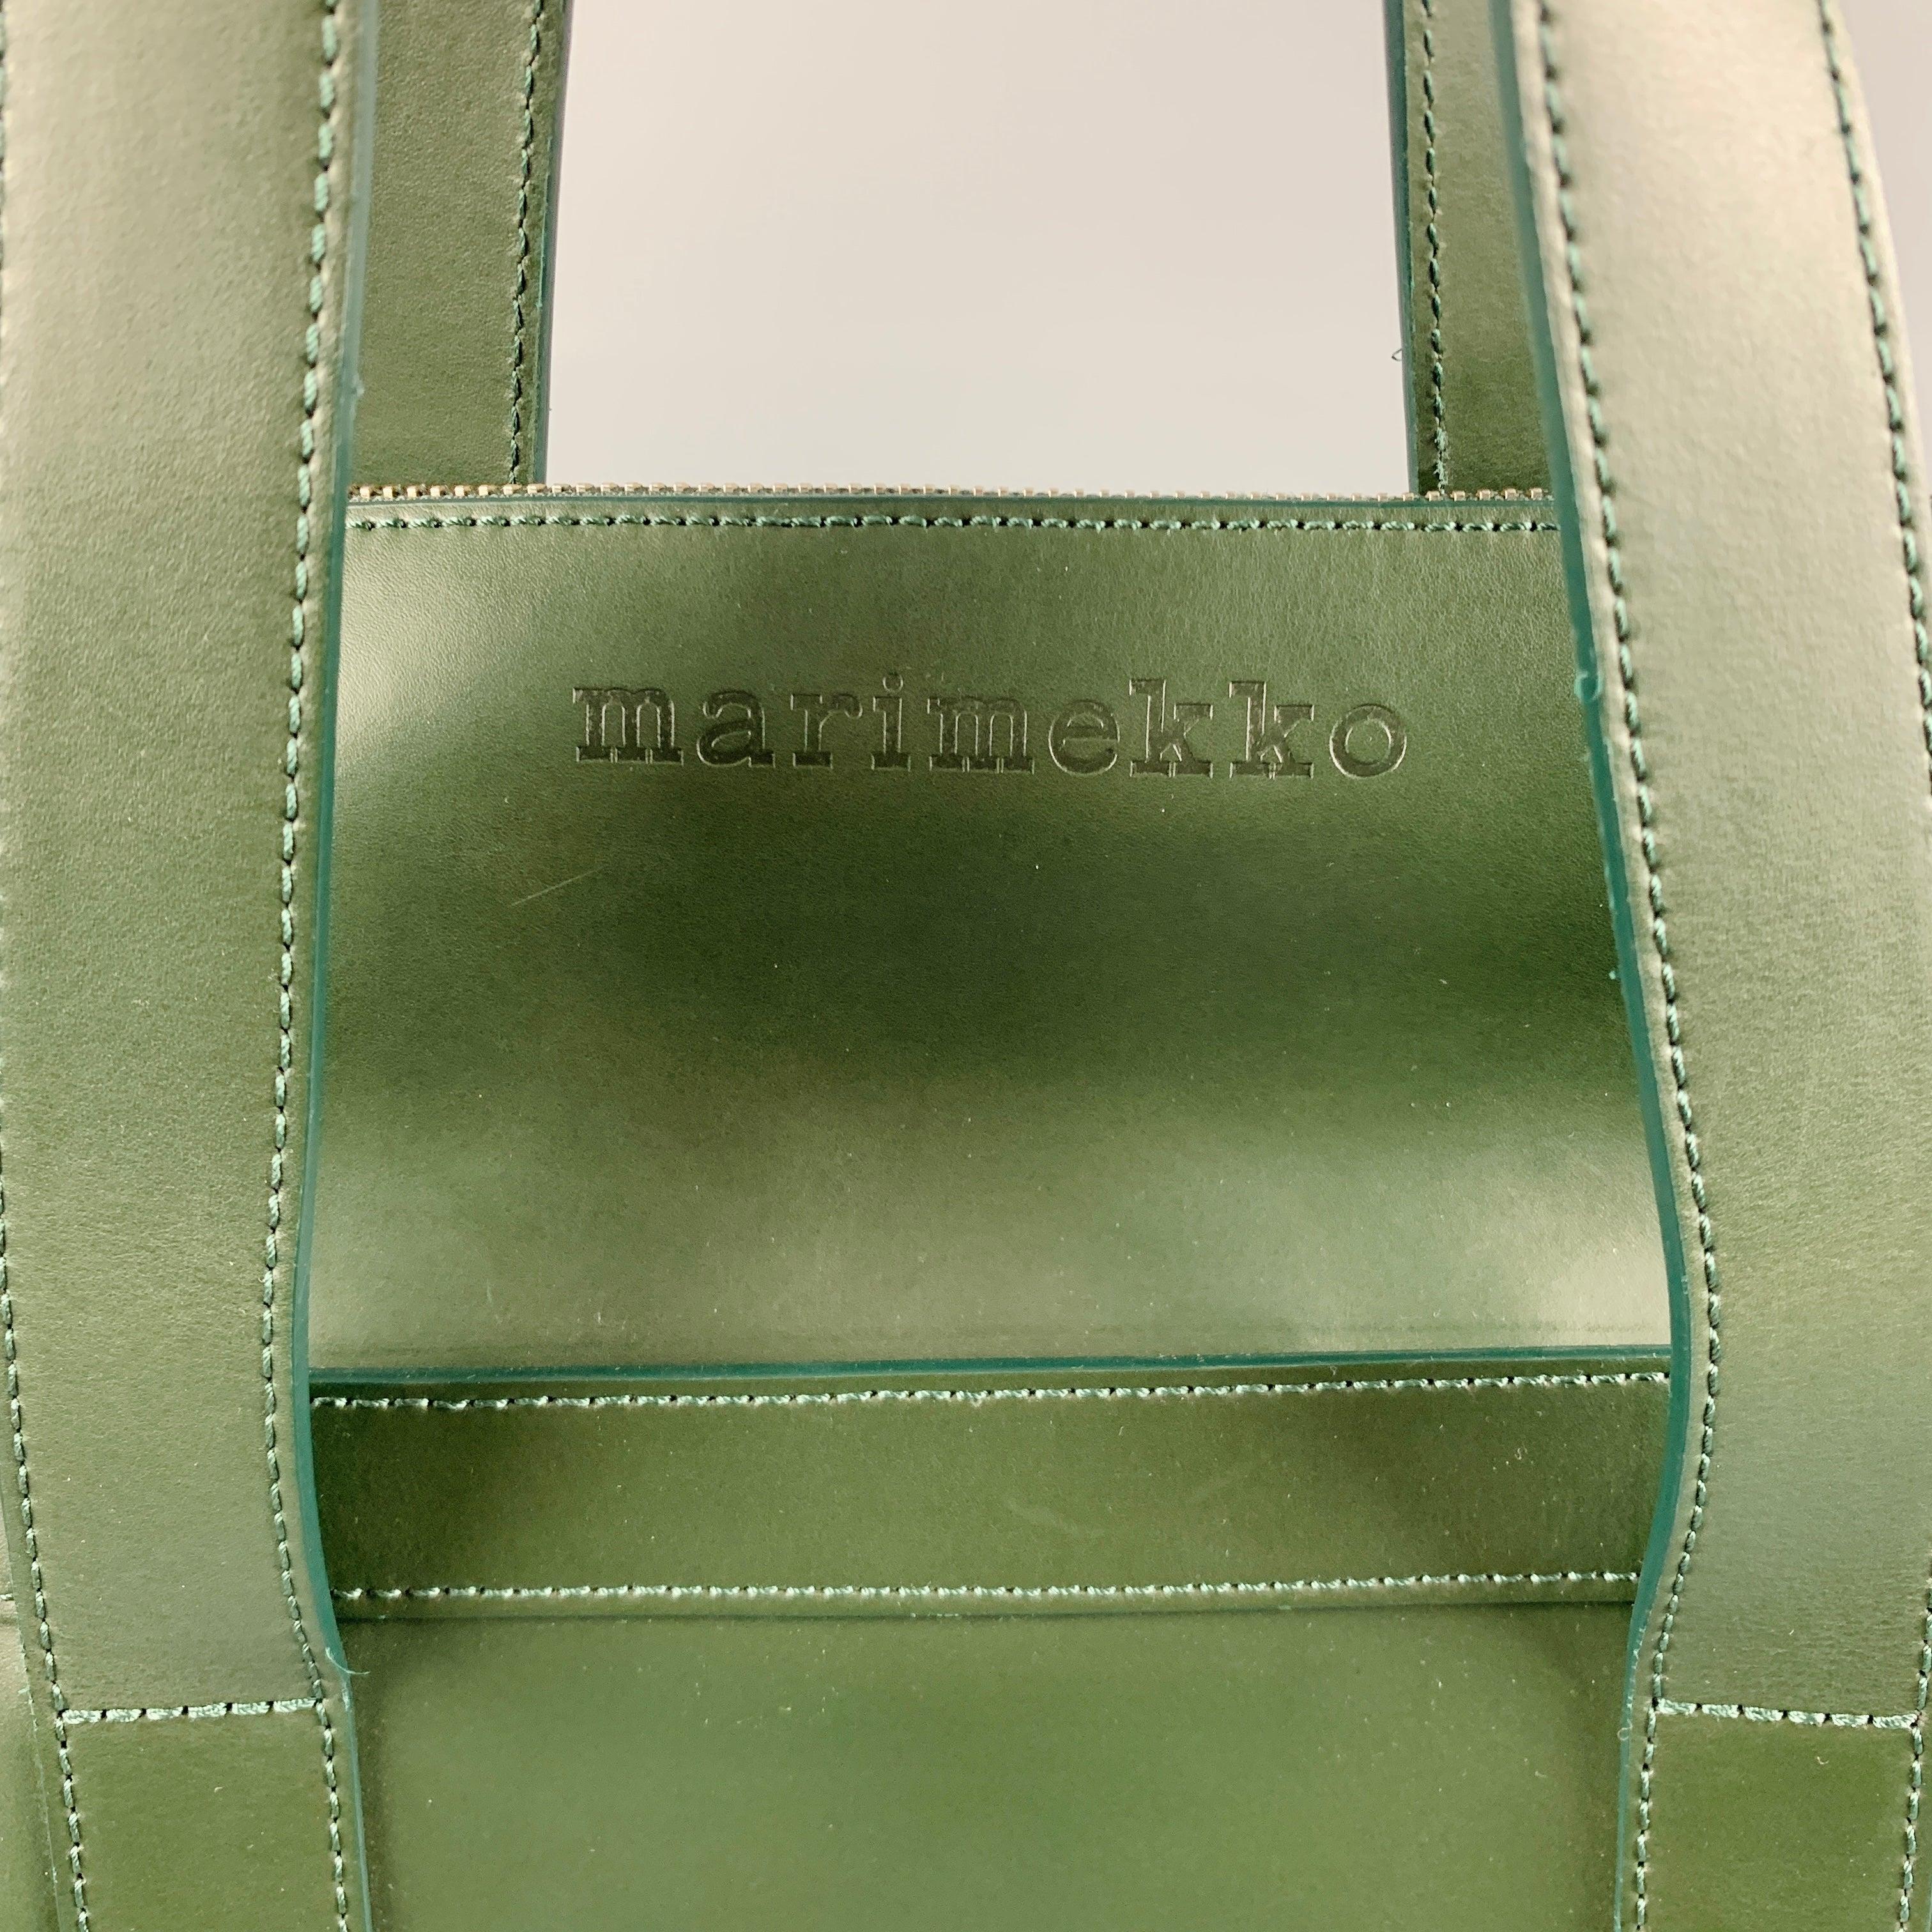 MARIMEKKO handbag
in a
green leather fabric featuring a tote style, silver tone hardware, and zip closure. Made in Hungary.Excellent Pre-Owned Condition. 

Marked:   048918/103226 

Measurements: 
  Length: 21 inches Width: 7.25 inches Height: 15